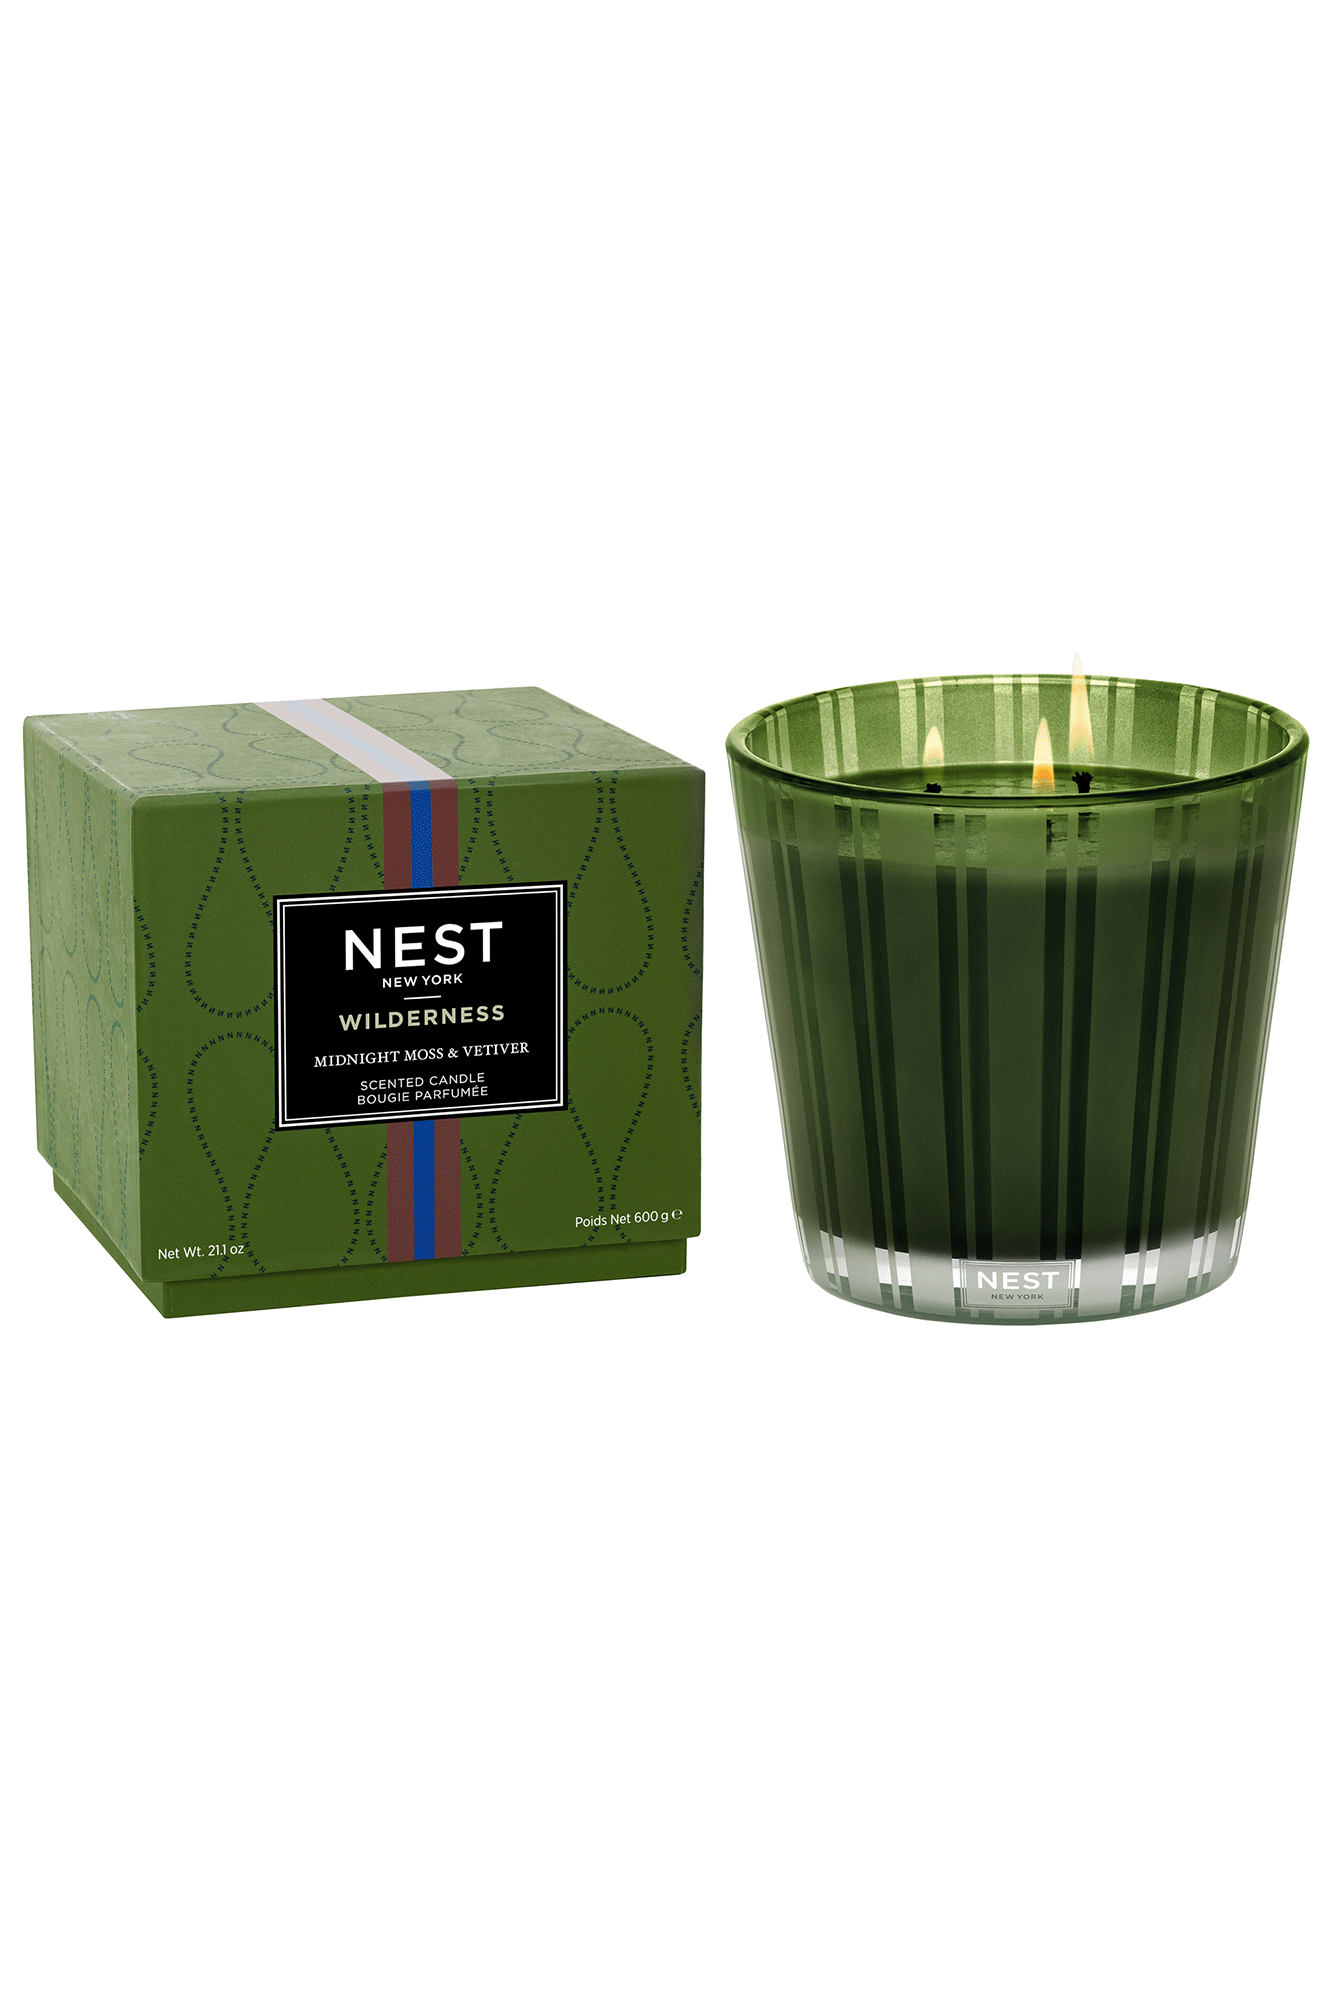 Brighten up your home with the Midnight Moss & Vetiver 3 Wick Candle from Nest. Featuring a proprietary premium wax blend, this exquisitely scented candle provides a clean and even burn while subtly filling your space with a luxurious scent. Enjoy your favorite fragrance longer with this high-quality candle.